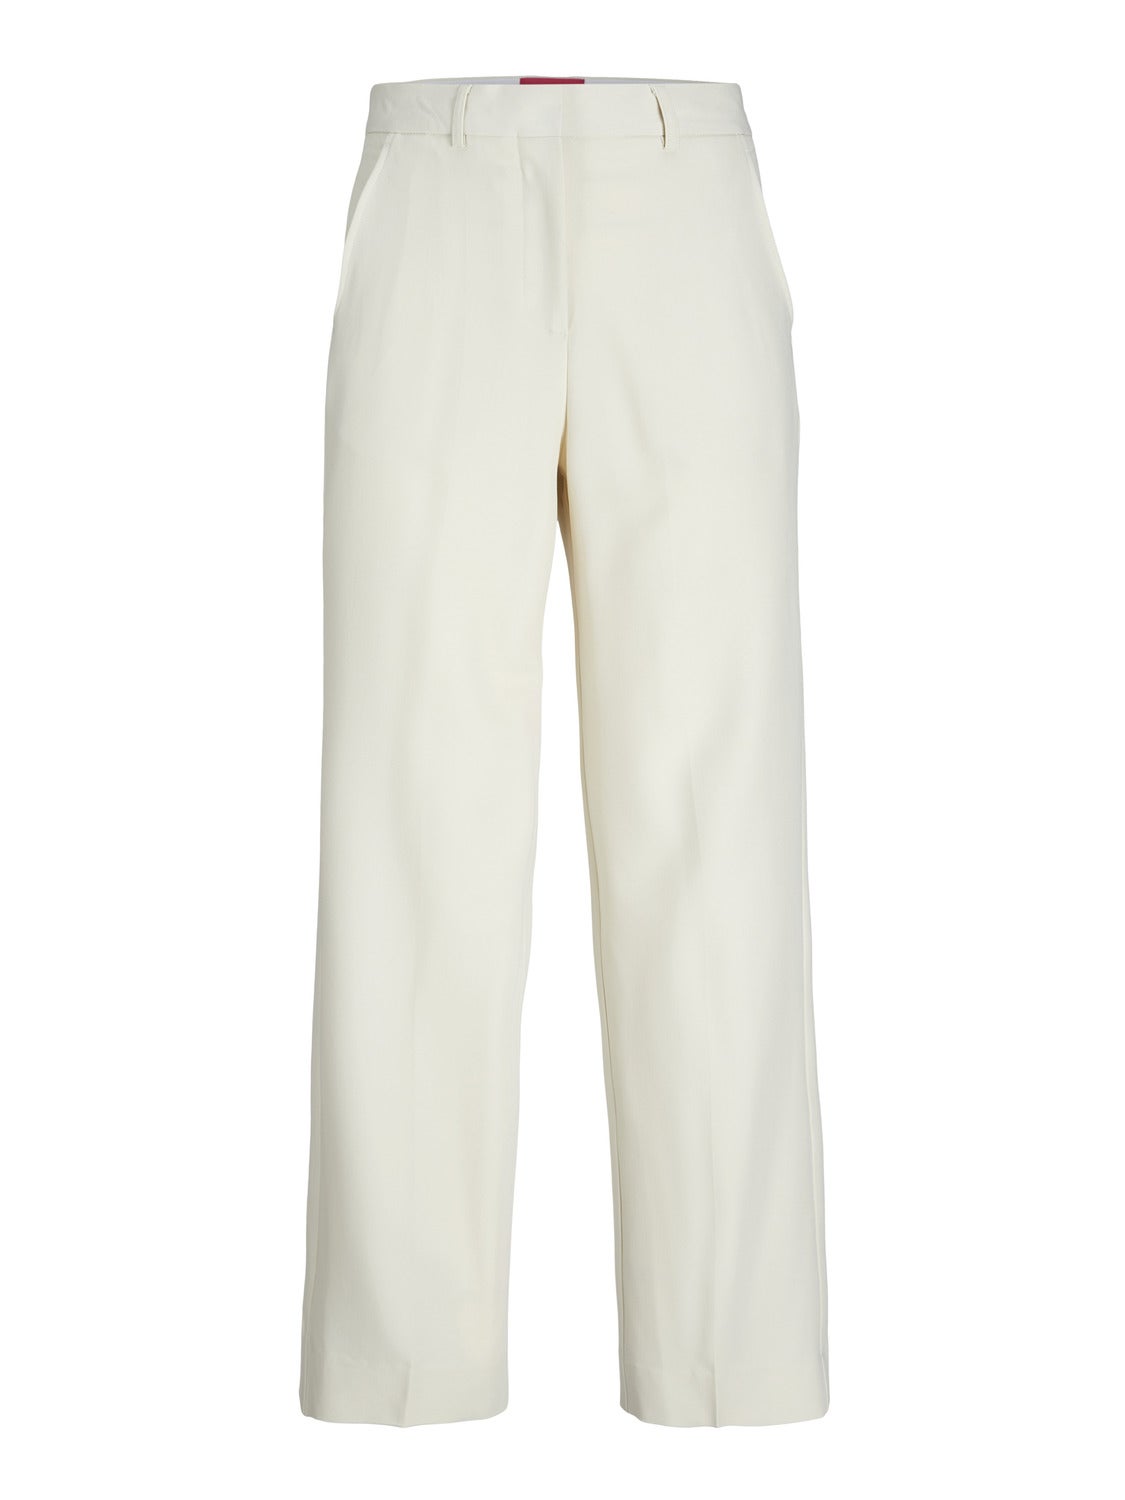 Buy JACK AND JONES White Solid Linen Slim Fit Mens Trousers | Shoppers Stop